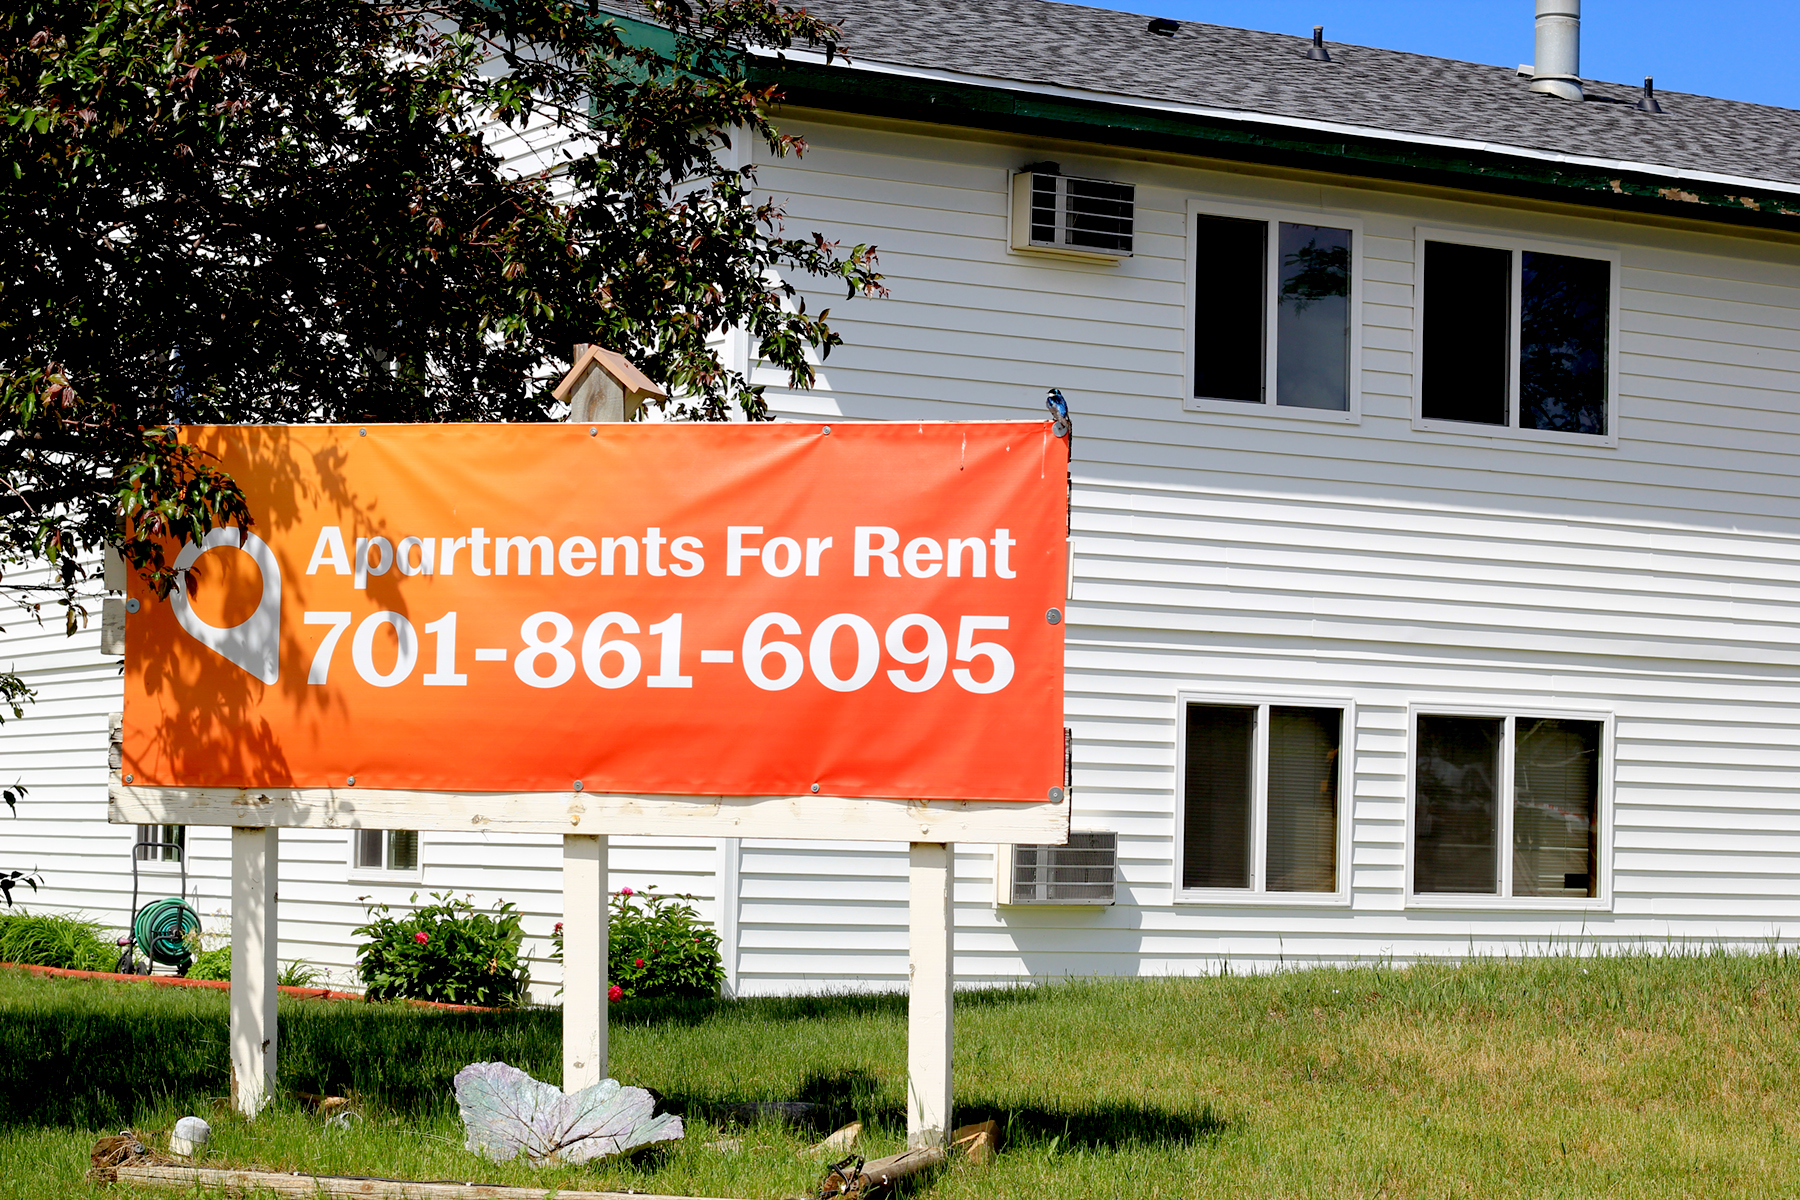 vcApartments for Rent in Washburn North DakotaApartments for Rent in Washburn North Dakota